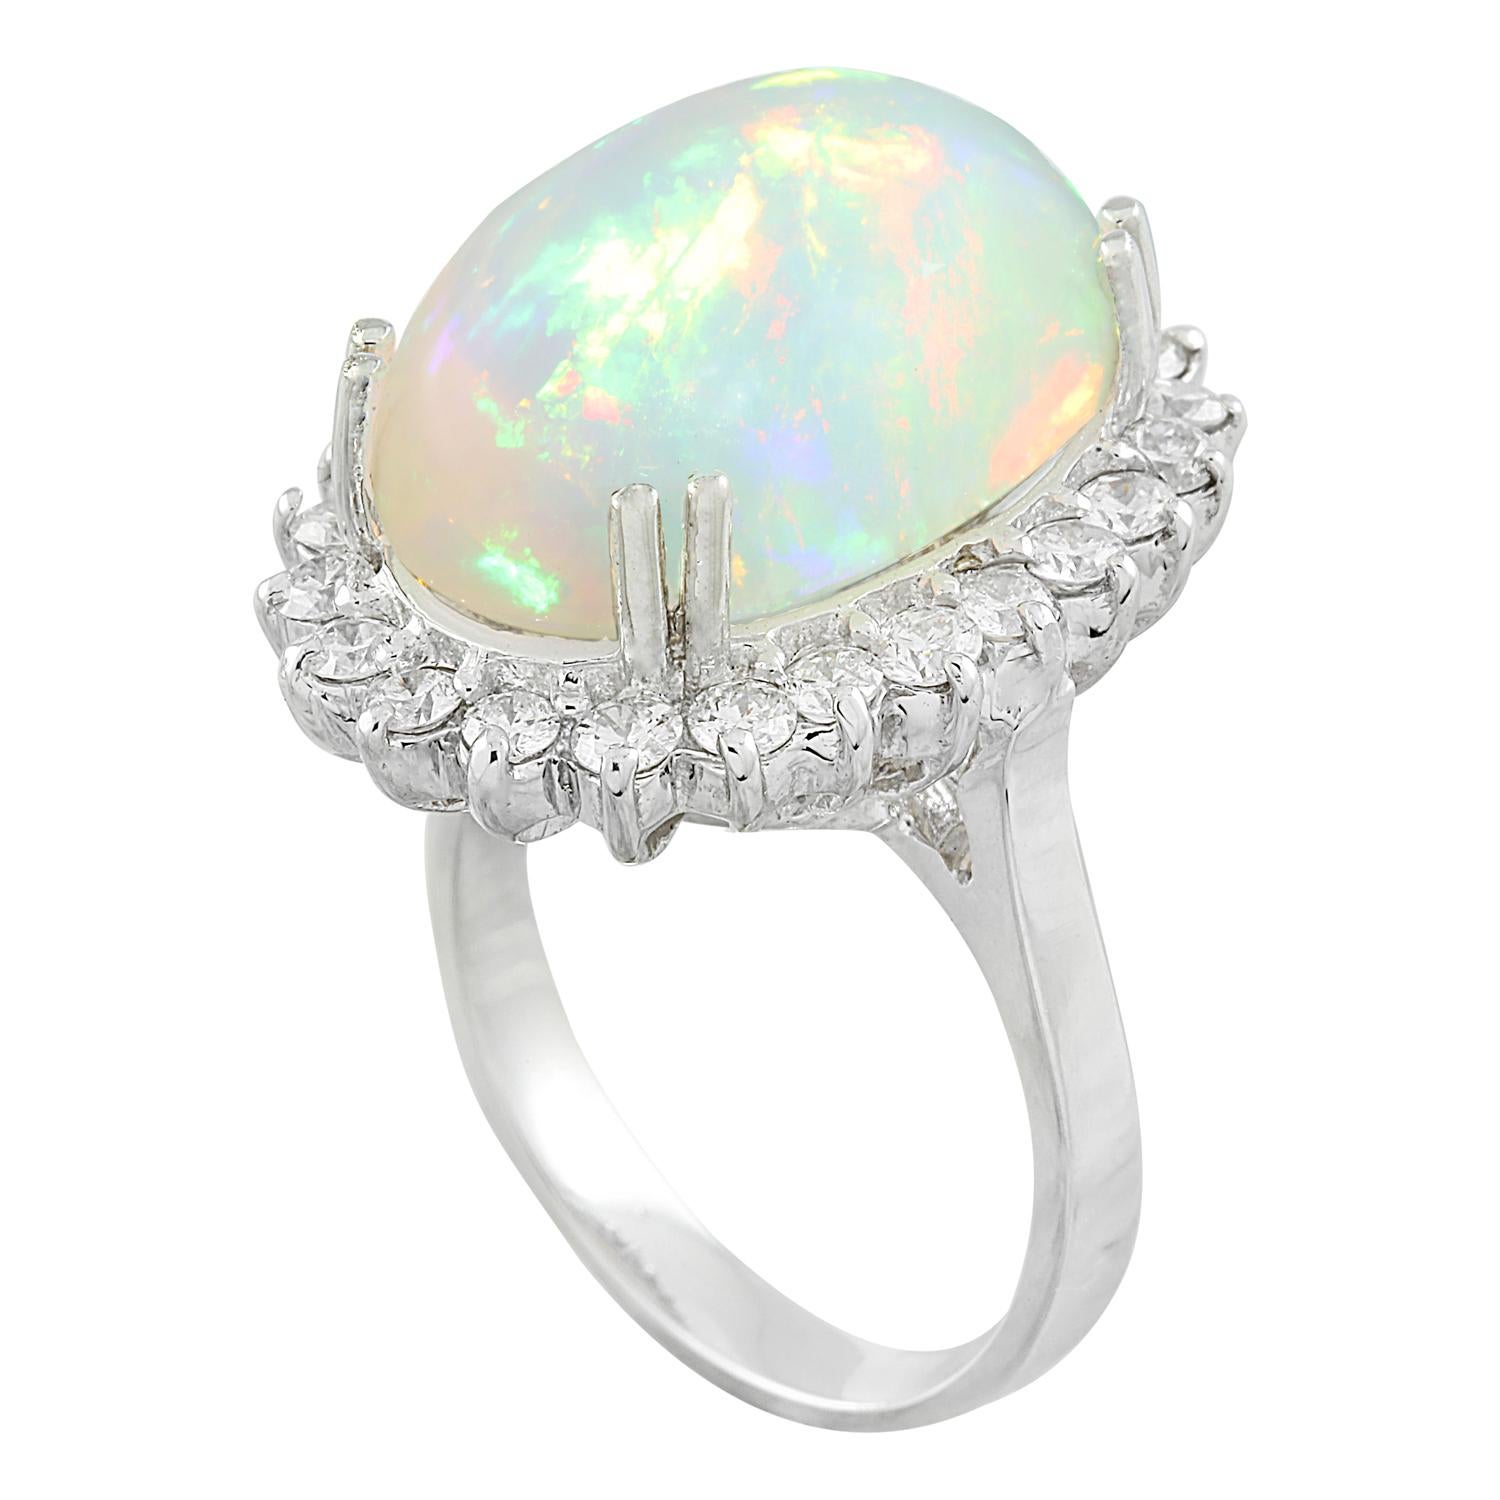 9.15 Carat Natural Opal 14 Karat Solid White Gold Diamond Ring
Stamped: 14K 
Ring Size 7
Total Ring Weight: 7.1 Grams 
Opal Weight 8.05 Carat (18.00x13.00 Millimeters)
Natural Opal Treatment: None 
Diamond Weight: 1.10 carat (F-G Color, VS2-SI1